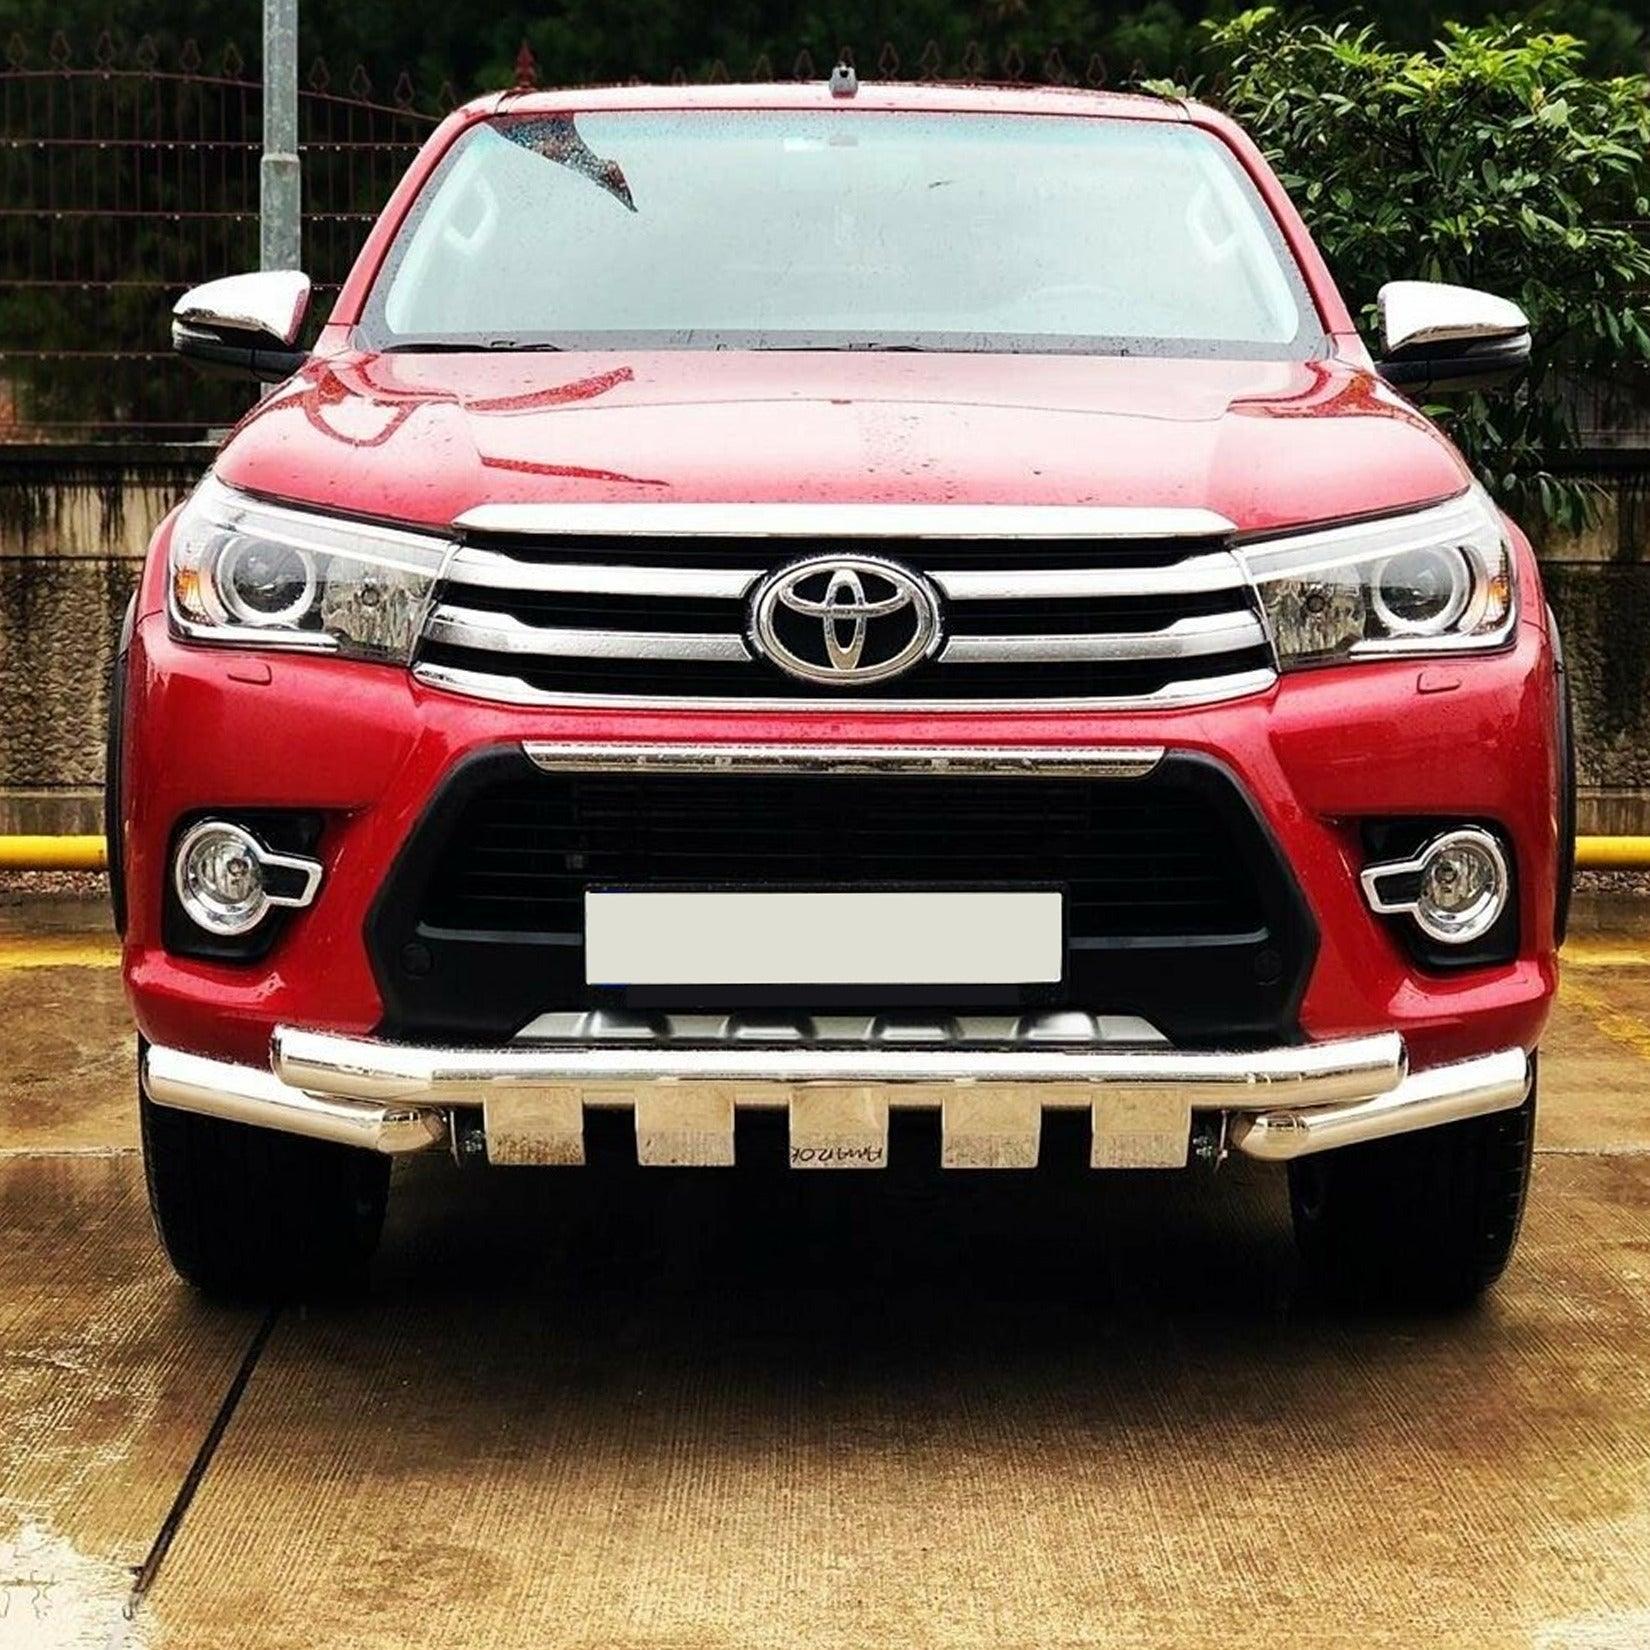 TOYOTA HILUX MK8 2016 ON SX STYLE STAINLESS STEEL SPOILER BAR - Storm Xccessories2